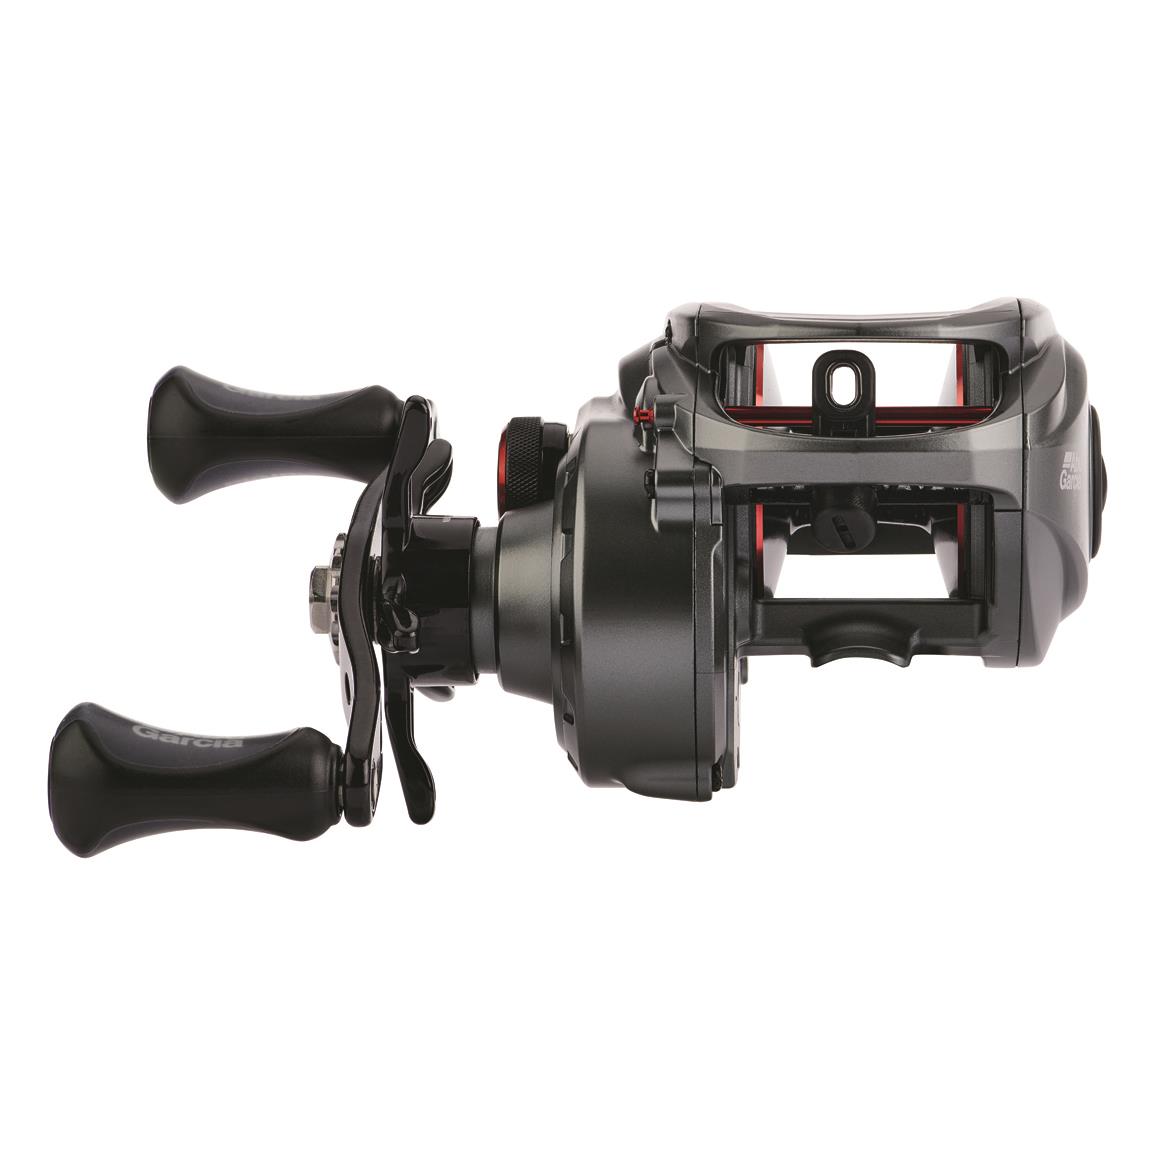 Abu Garcia - A continued tradition of Swedish craftsmanship and design, the  ambassadeur® Catfish Pro round baitcast reel features a six pin centrifugal  braking system and a robust aluminum construction; the Catfish